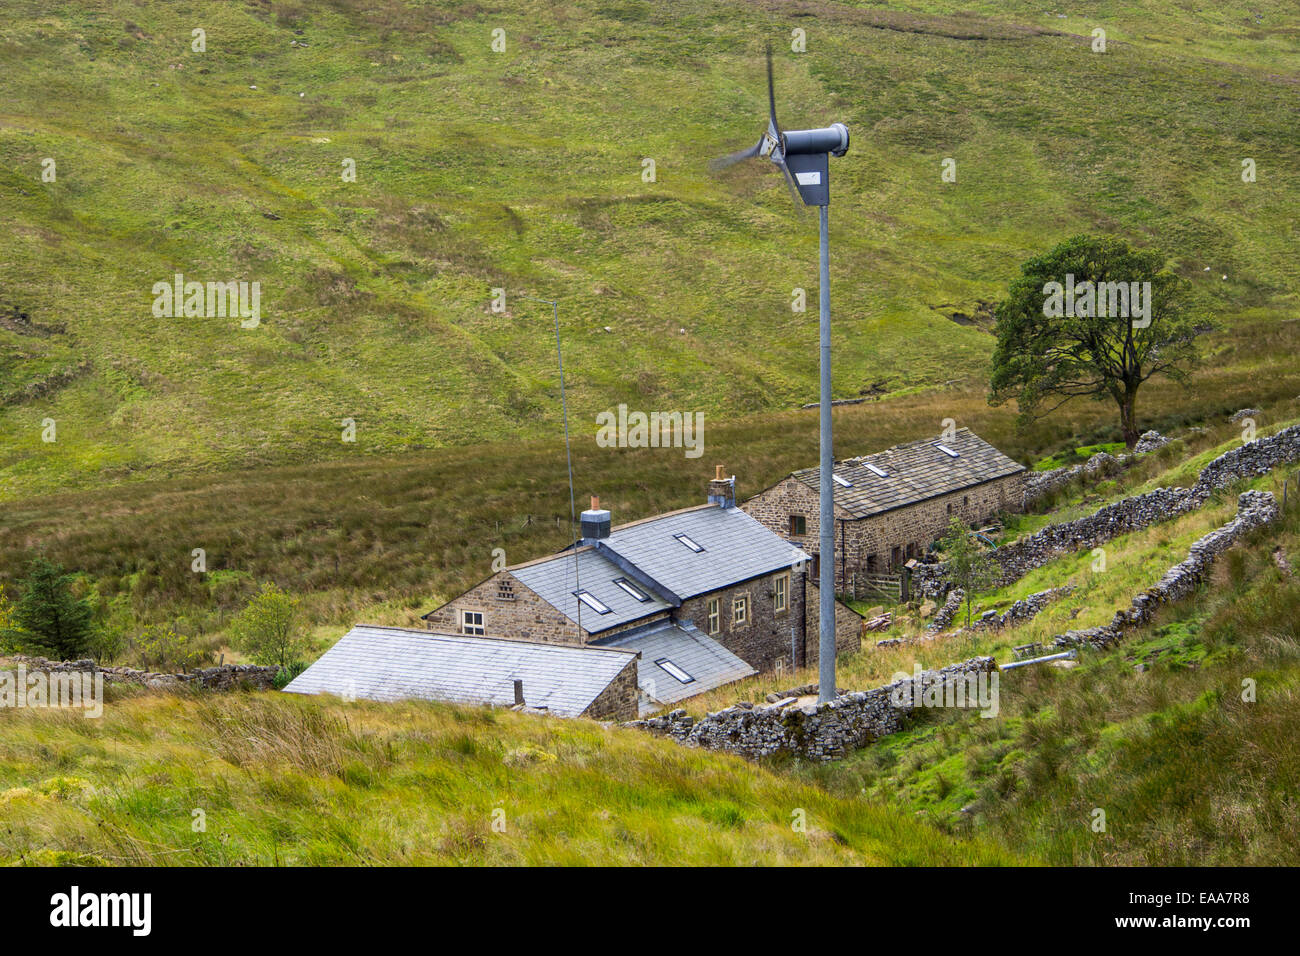 A remote off grid farmhouse at the head of Littondale with a wind turbine for power, Yorkshire Dales, UK. Stock Photo